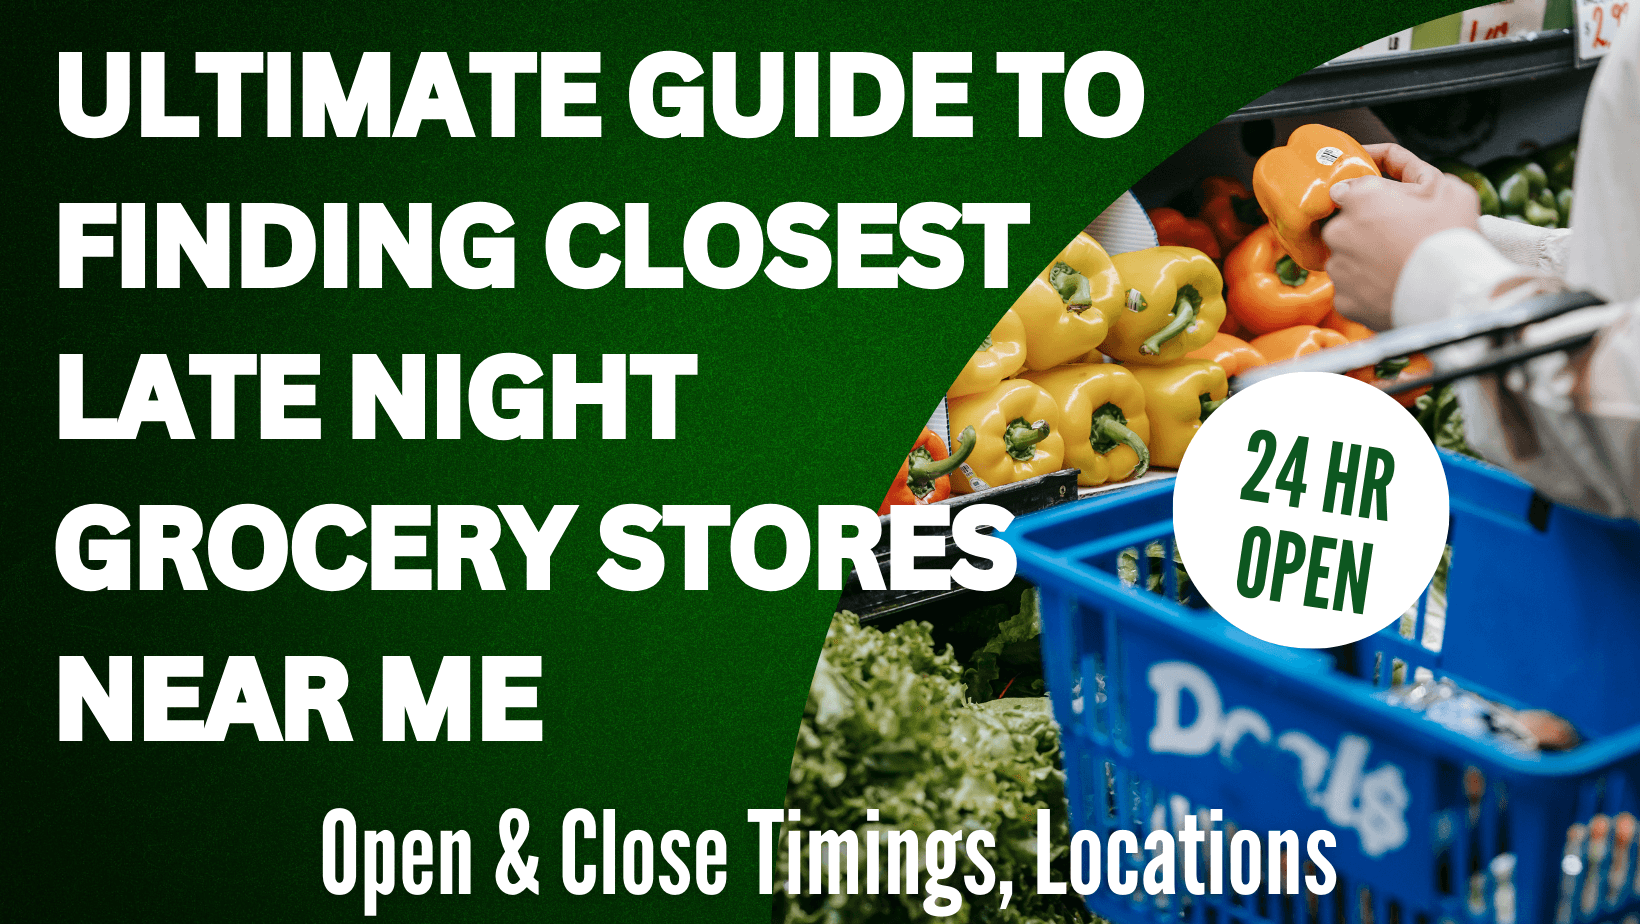 Nearest Grocery Store Open & Close Timings